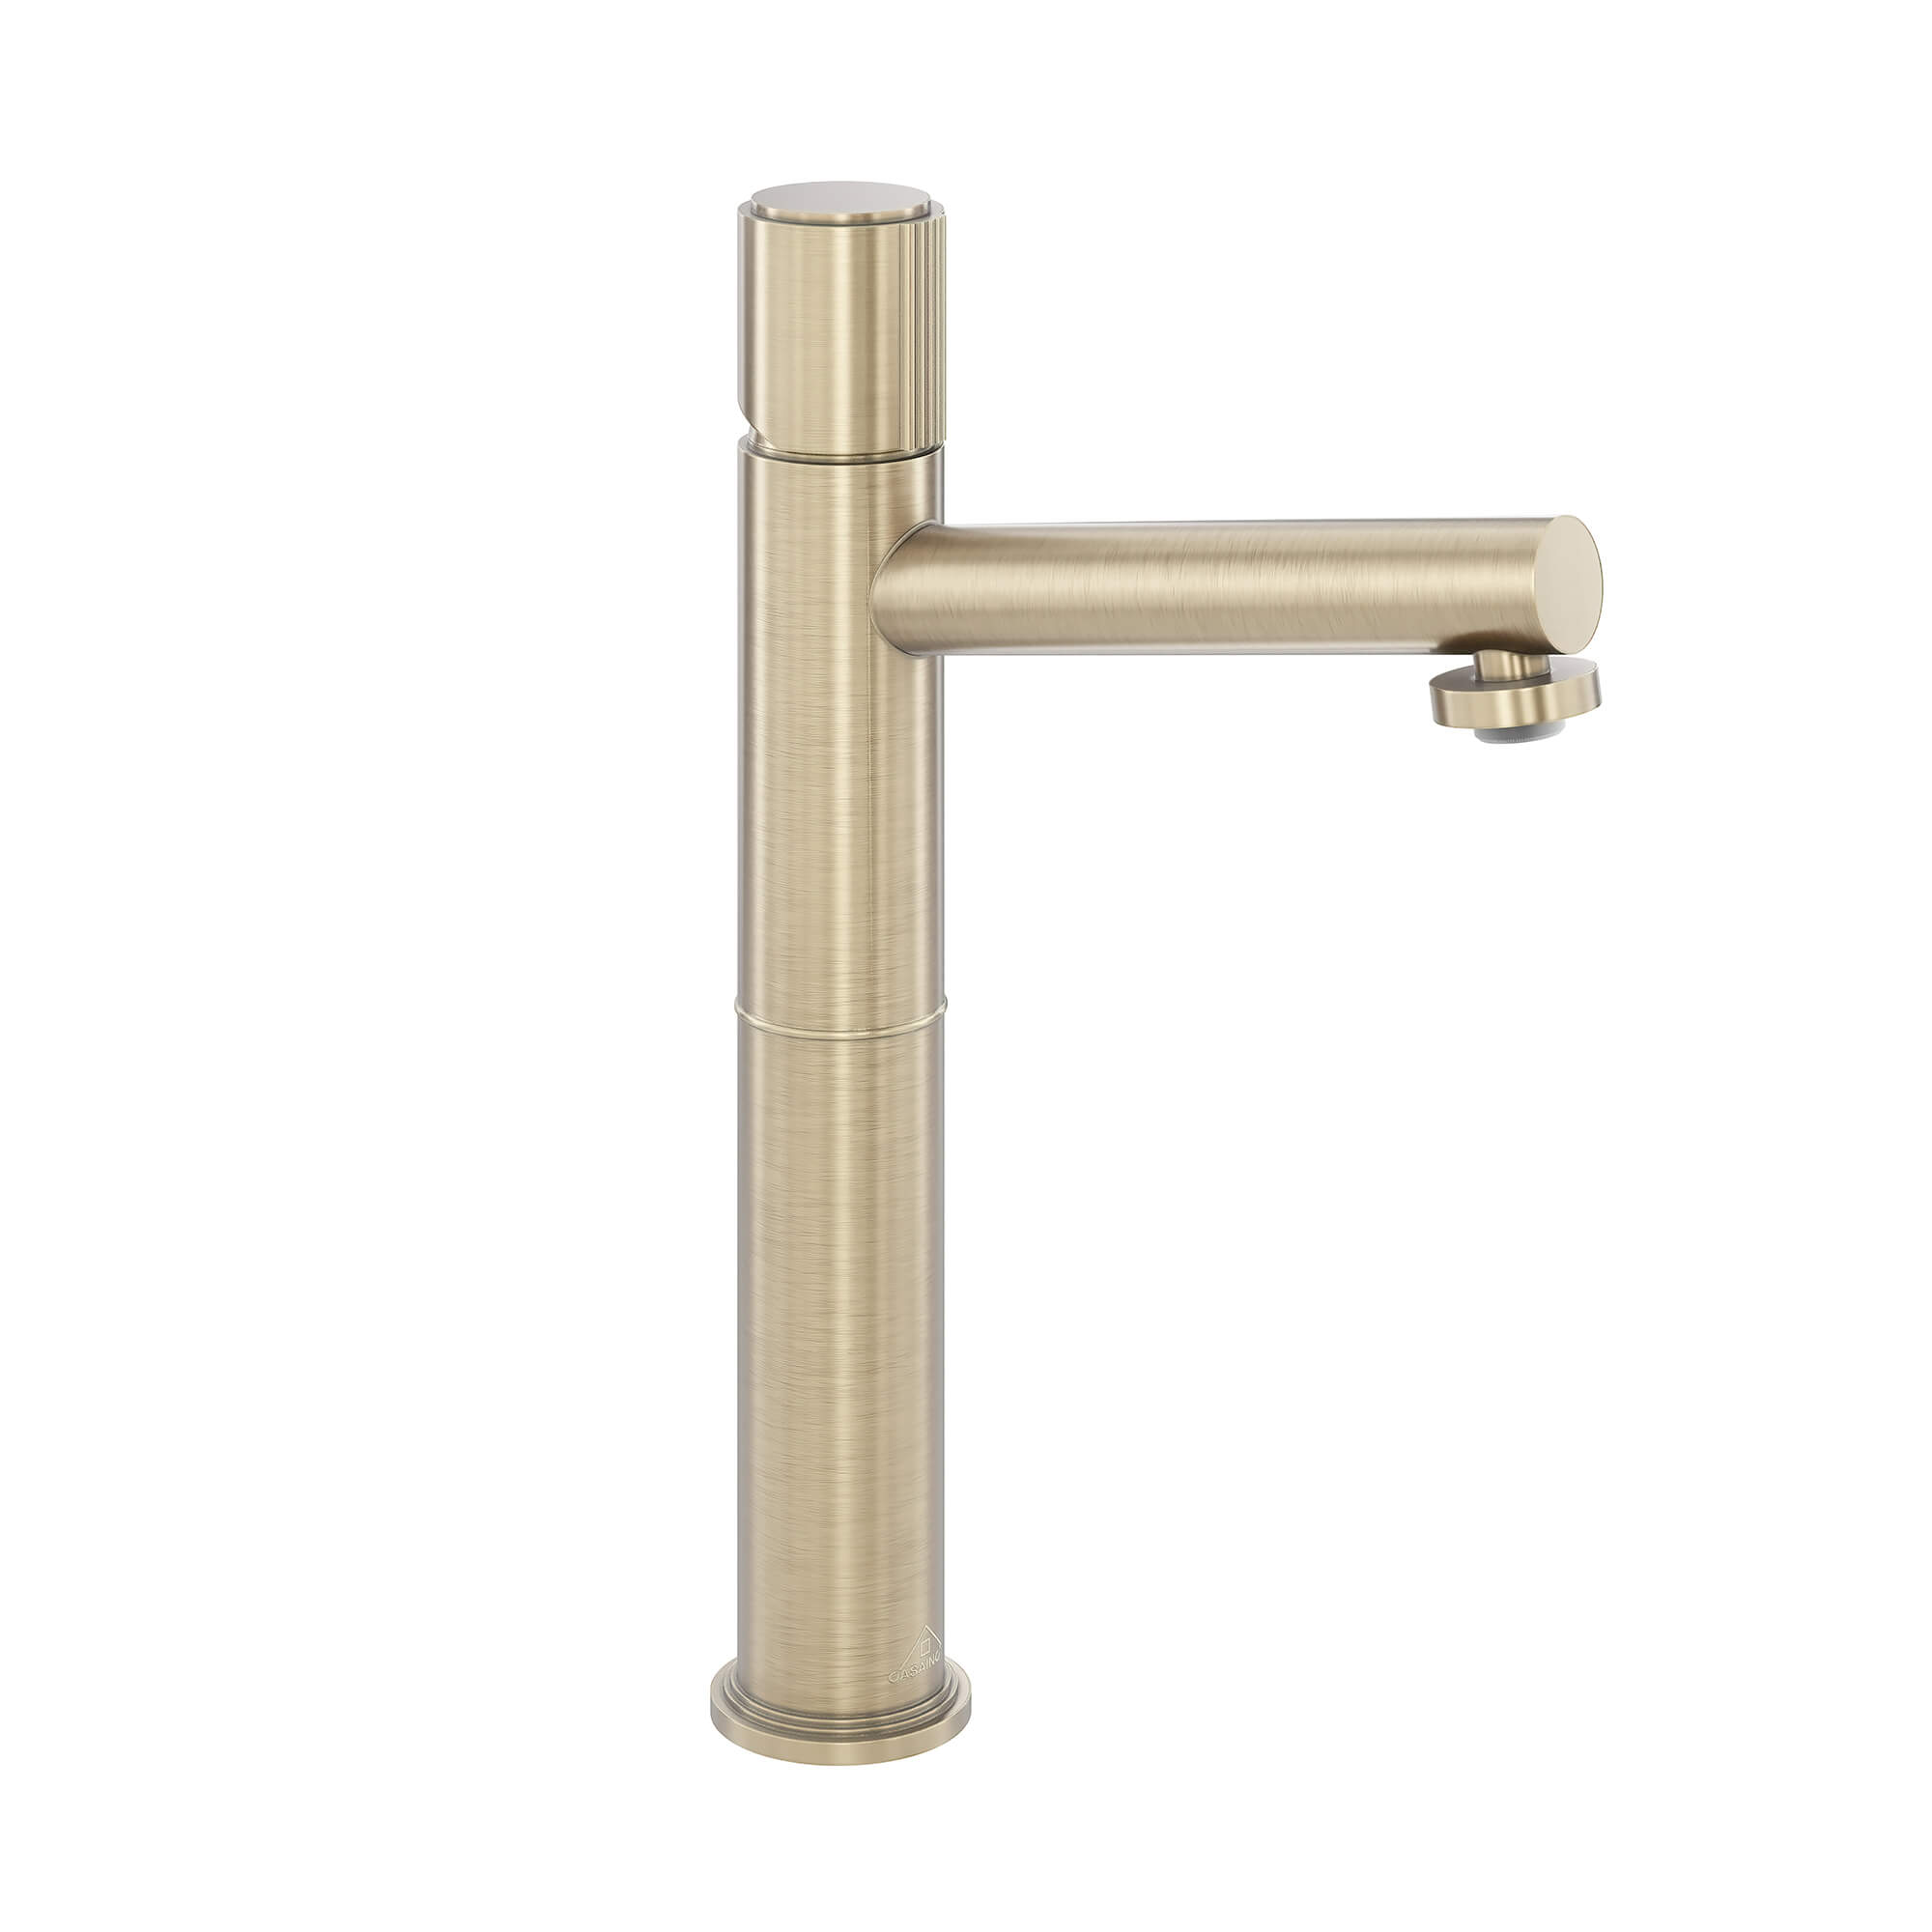 CASAINC 1.2GPM Brushed Champagne Gold High Sink Faucet with Bounce Drainer